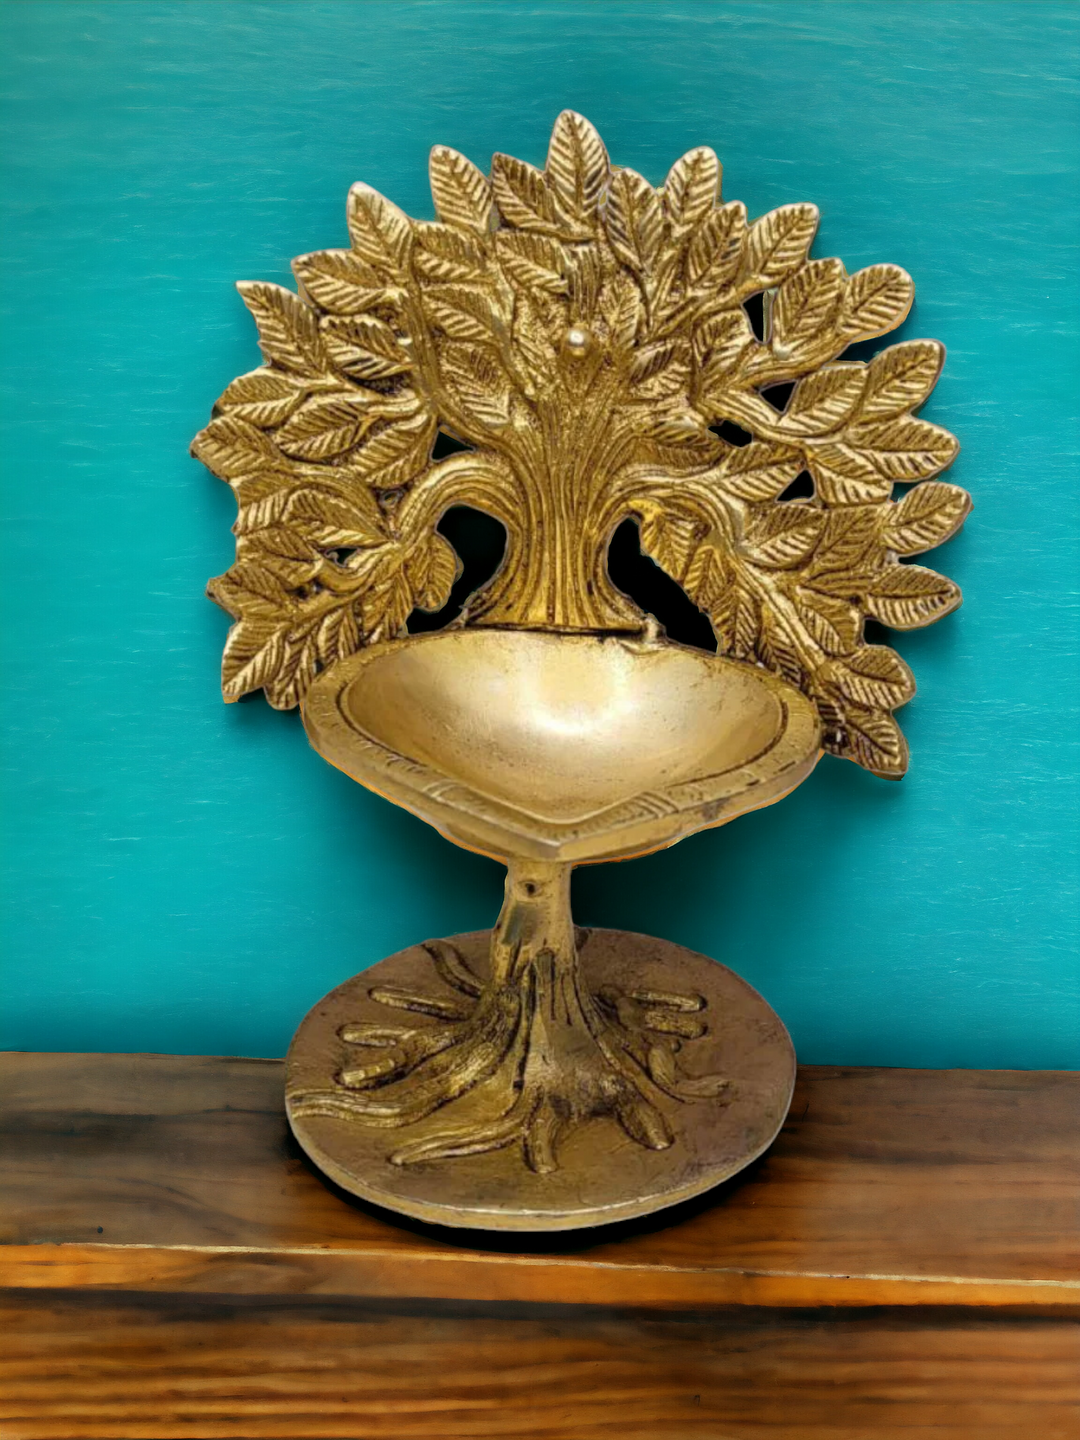 Tamas Brass Handcrafted Bodhi Tree Table Diya with Antique Finish (4 x 4 x 7 Inches, Golden) (Pack of 1)